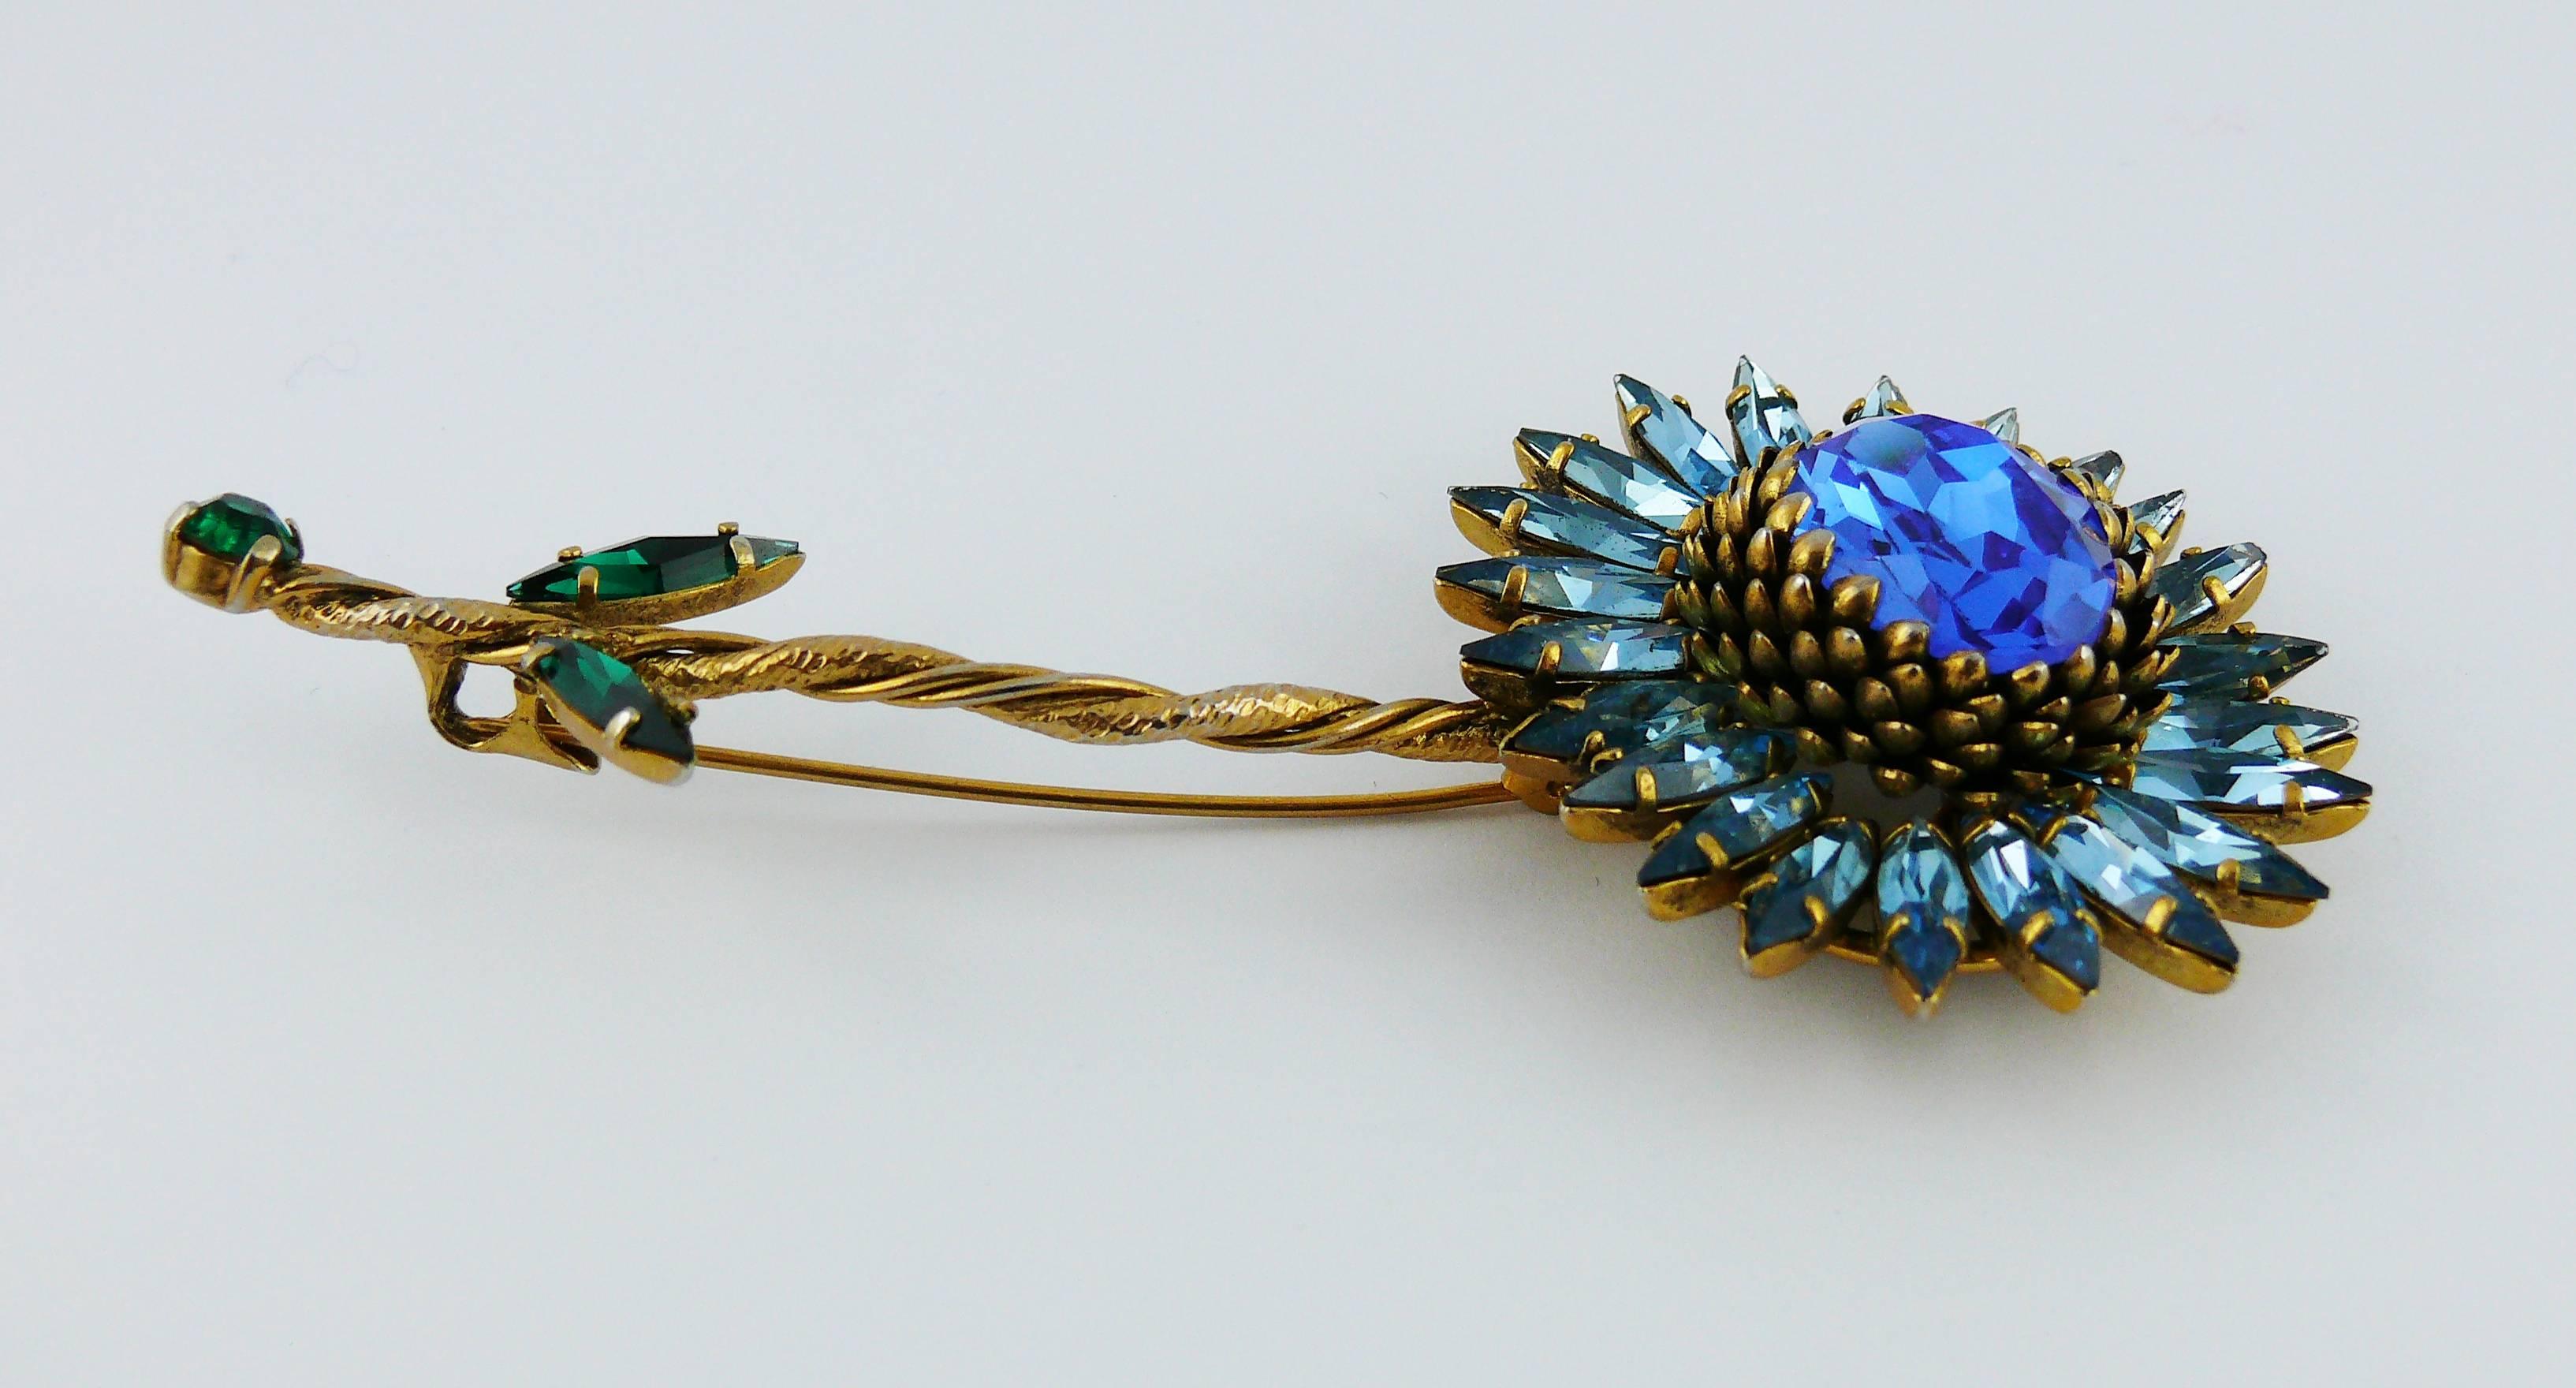 CHRISTIAN LACROIX vintage magnificient jewelled flower brooch.

Marked CHRISTIAN LACROIX CL Made in France.

Indicative measurements : length approx. 10.6 cm (4.17 inches) / max. width approx. 5 cm (1.97 inches).

Comes with a CHRISTIAN LACROIX